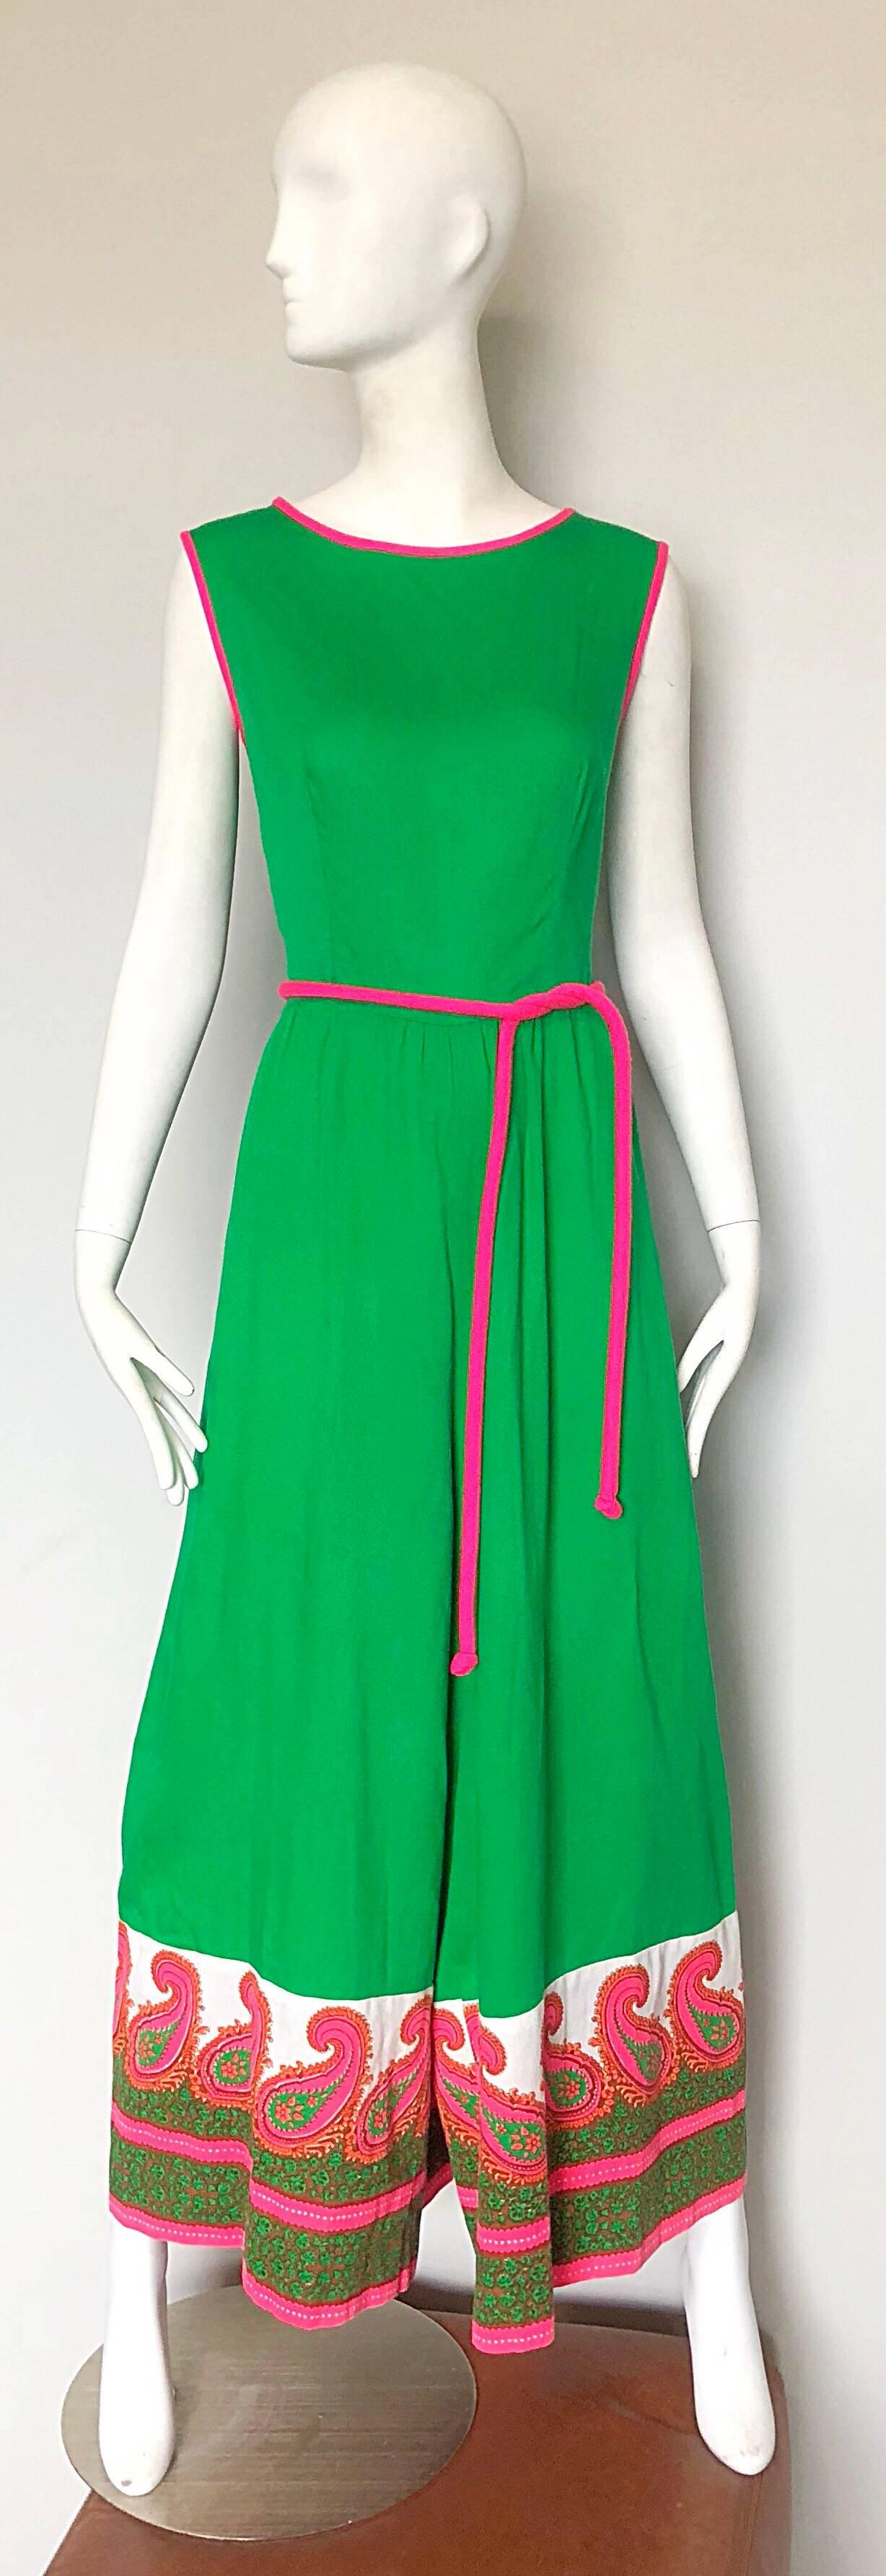 Rare 1960s ALFRED SHAHEEN kelly green and hot pink 
screen printed wide leg jumpsuit! Features shamrock kelly green with hot pink trim around the neck and sleeves, with a matching detachable tie belt. Hot pink, white and green paisley screen print